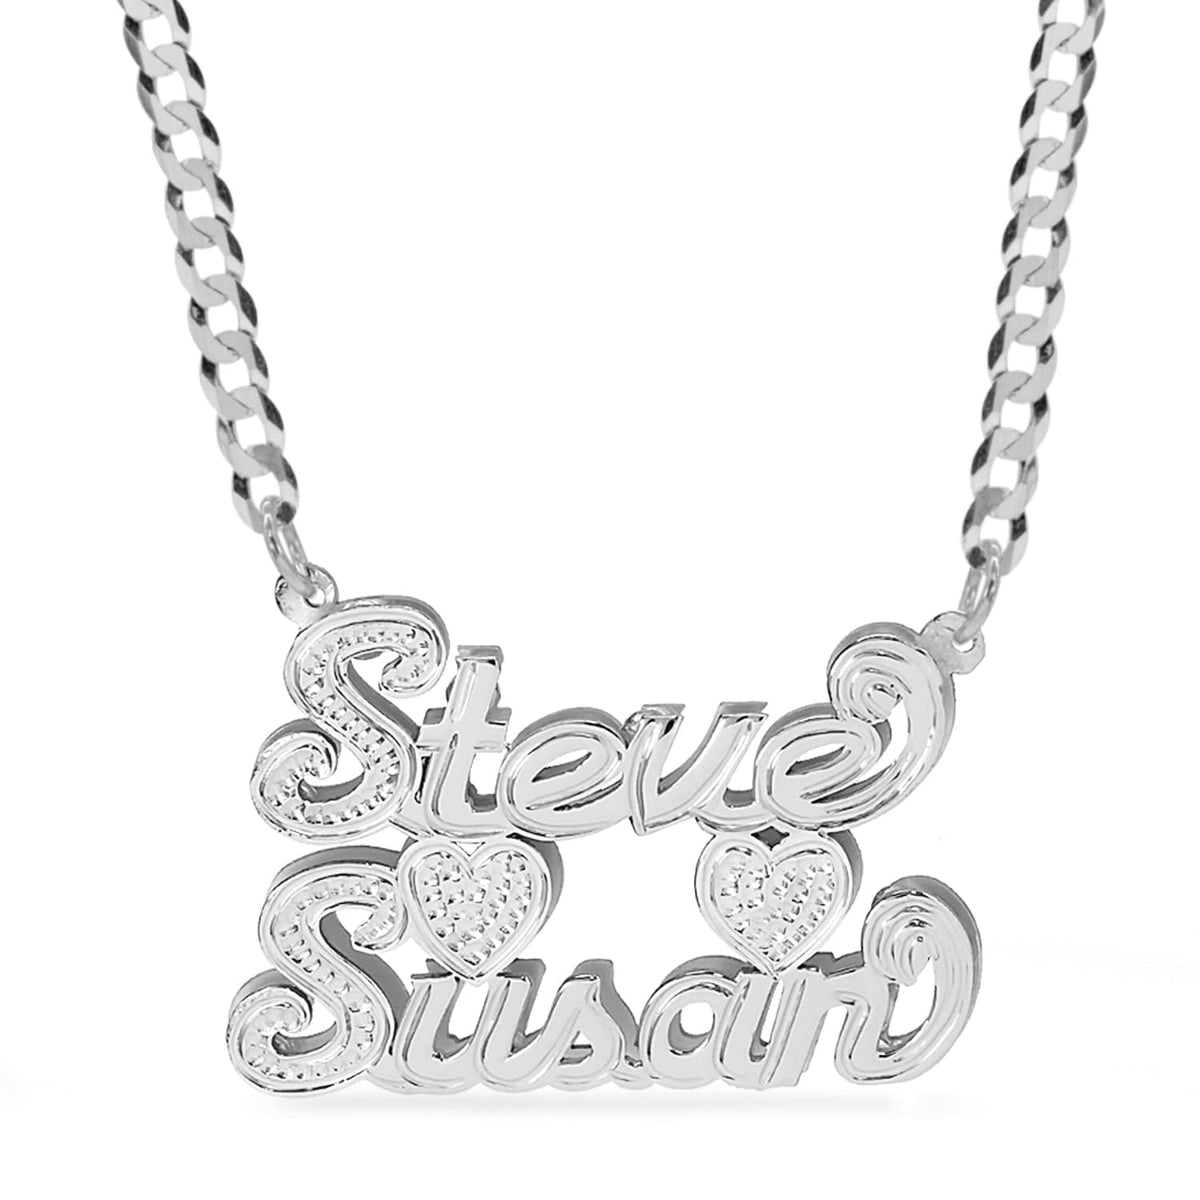 Sterling Silver / Cuban Chain Double Plated Couples Name Necklace with Cuban chain